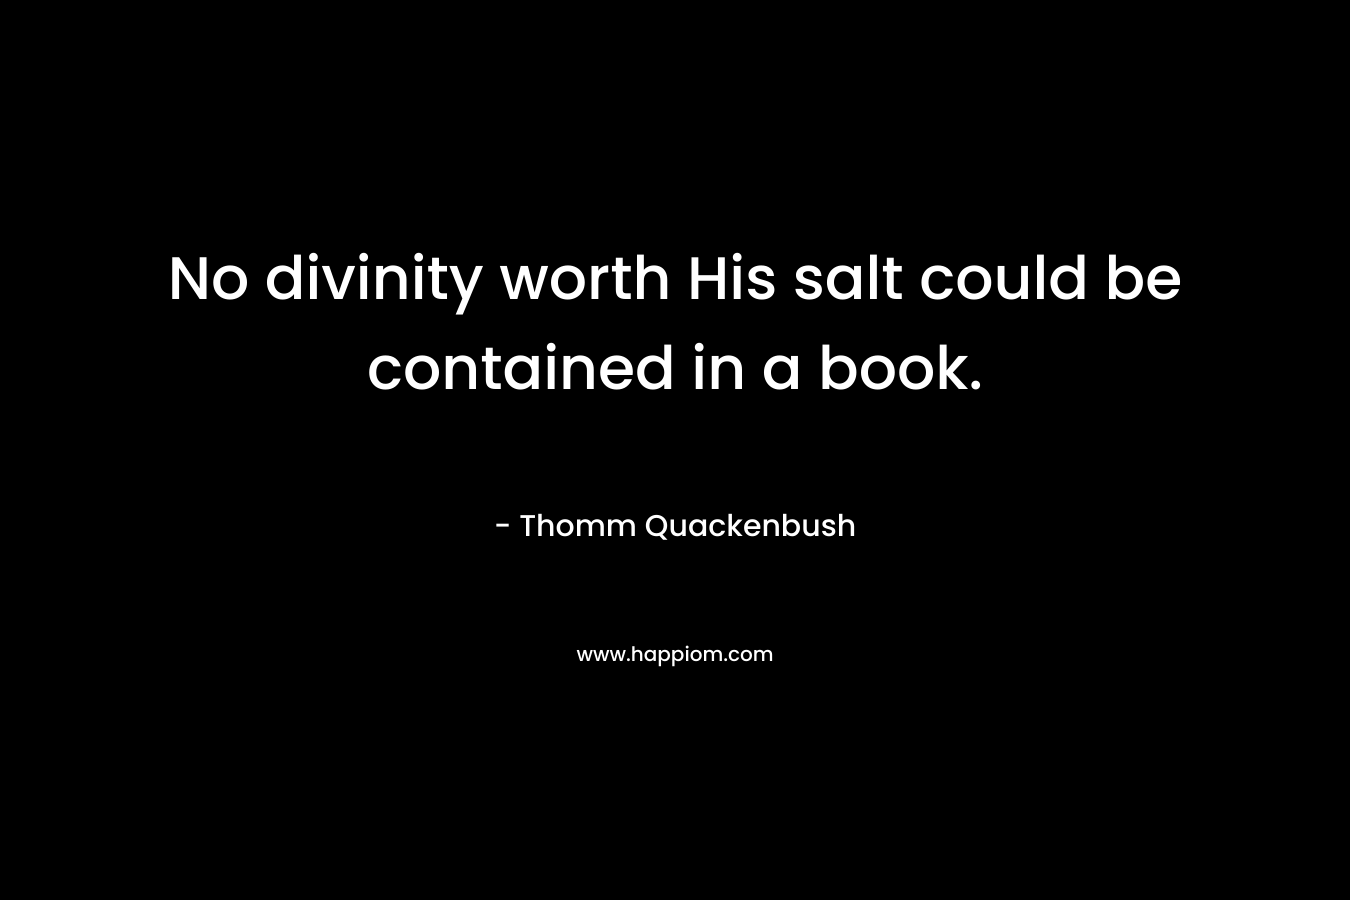 No divinity worth His salt could be contained in a book.